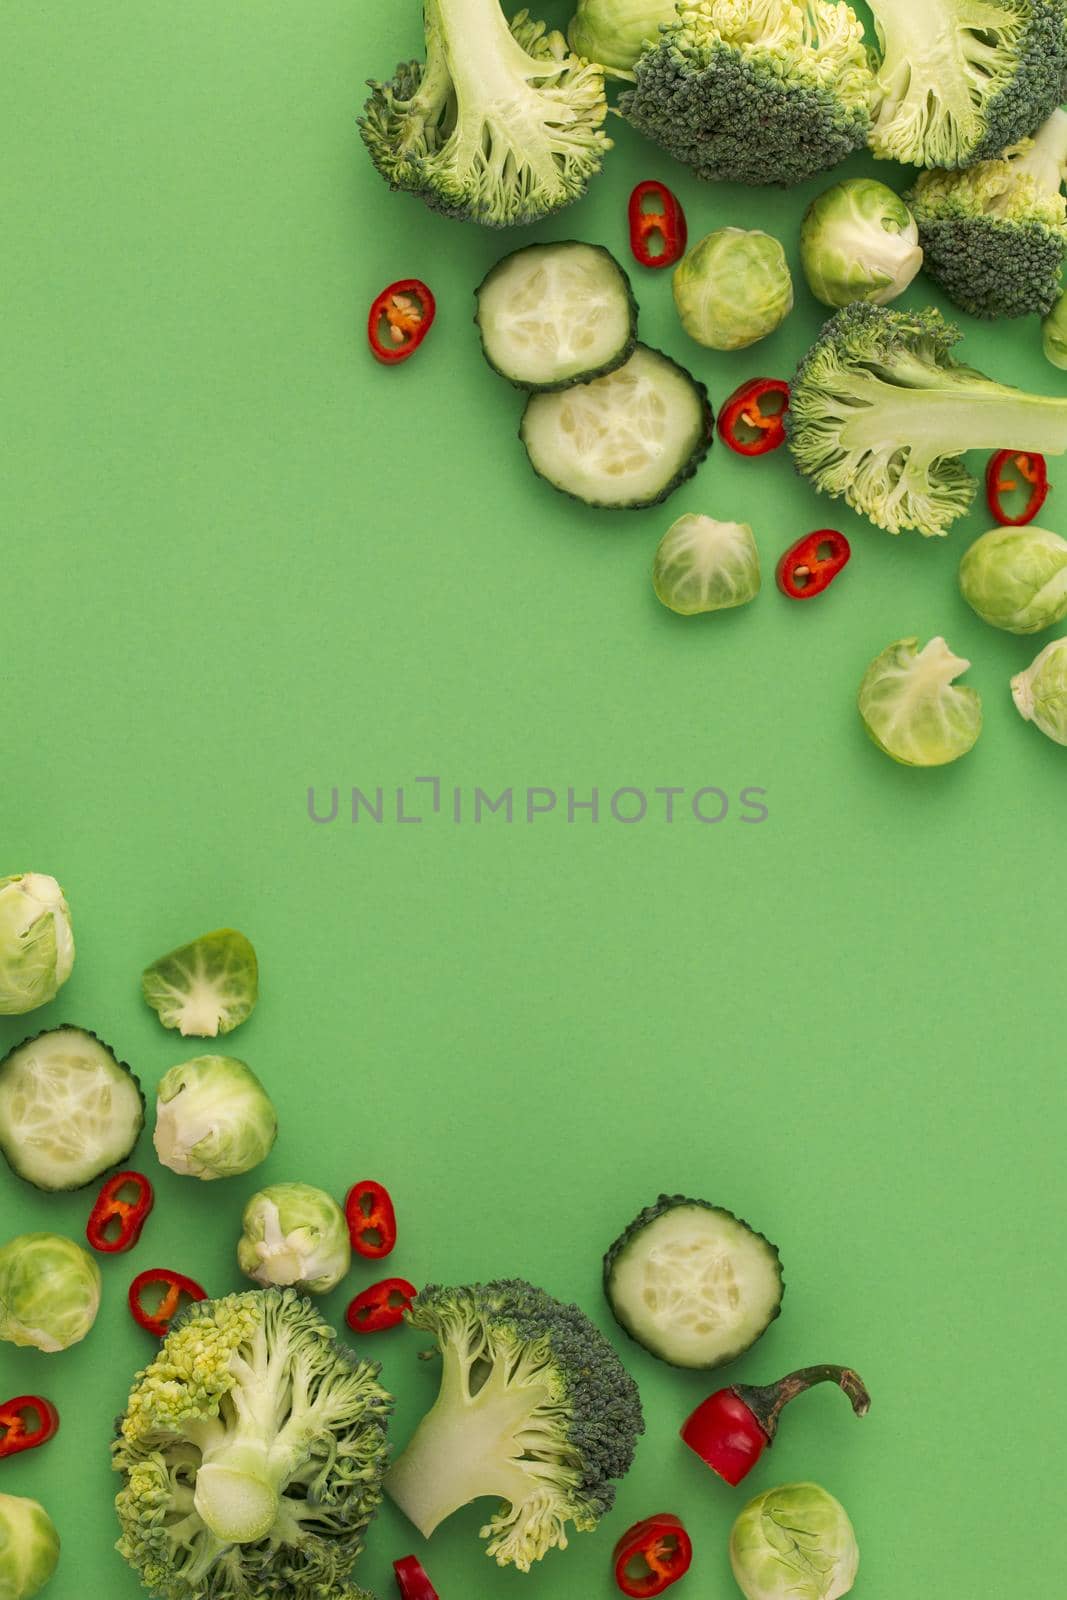 Vegetables food pattern made of broccoli, Brussels sprouts, cucumber, chili pepper, green background. Minimal flat lay design of nutrition, healthy eating, diets, vitamins. Top view, space for text